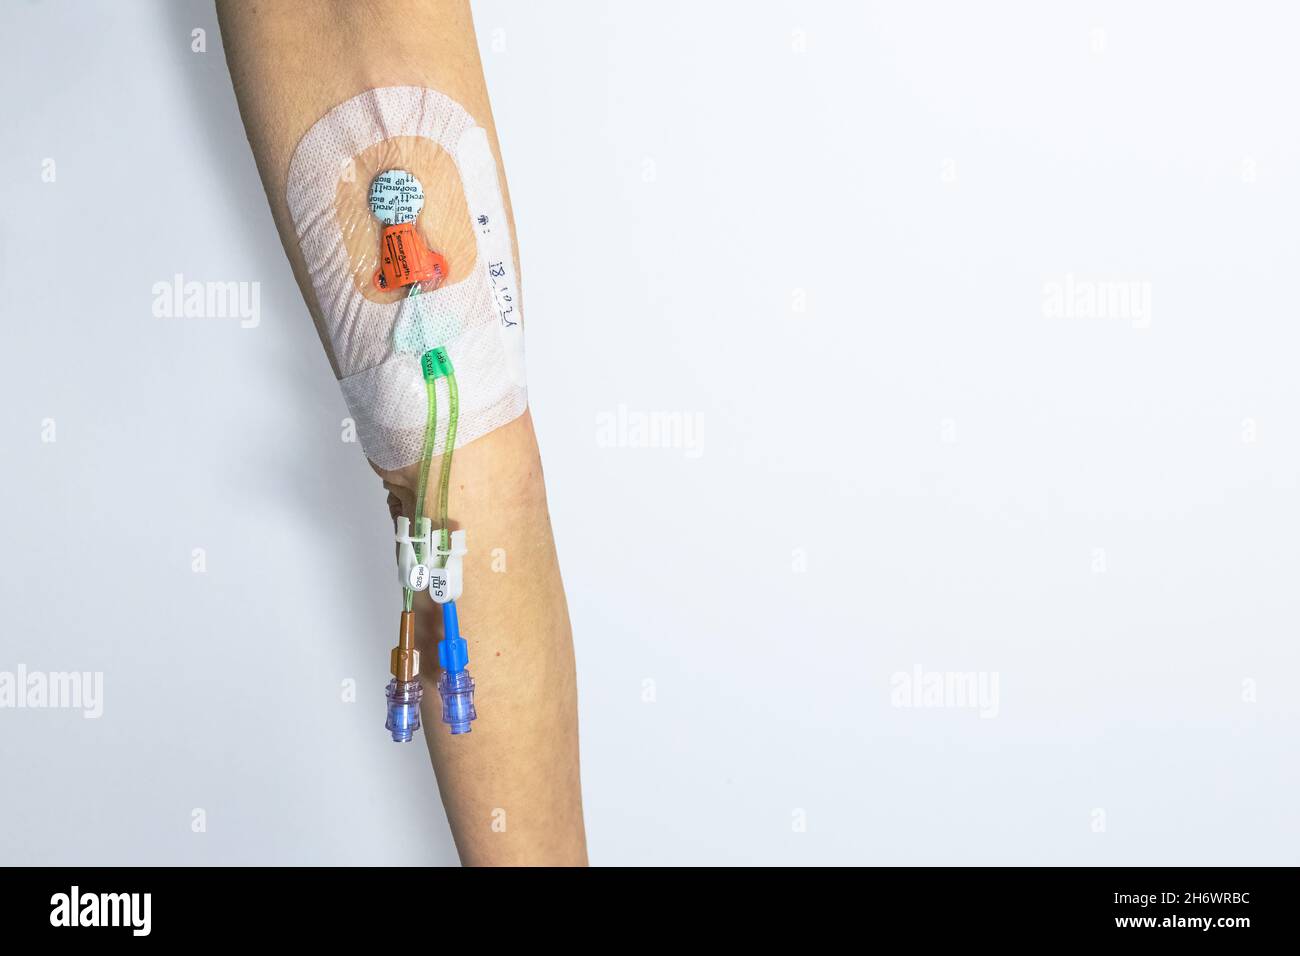 PICC line (peripherally inserted central catheter line) inserted in arm to administer chemotherapy treatment or other medicines Stock Photo